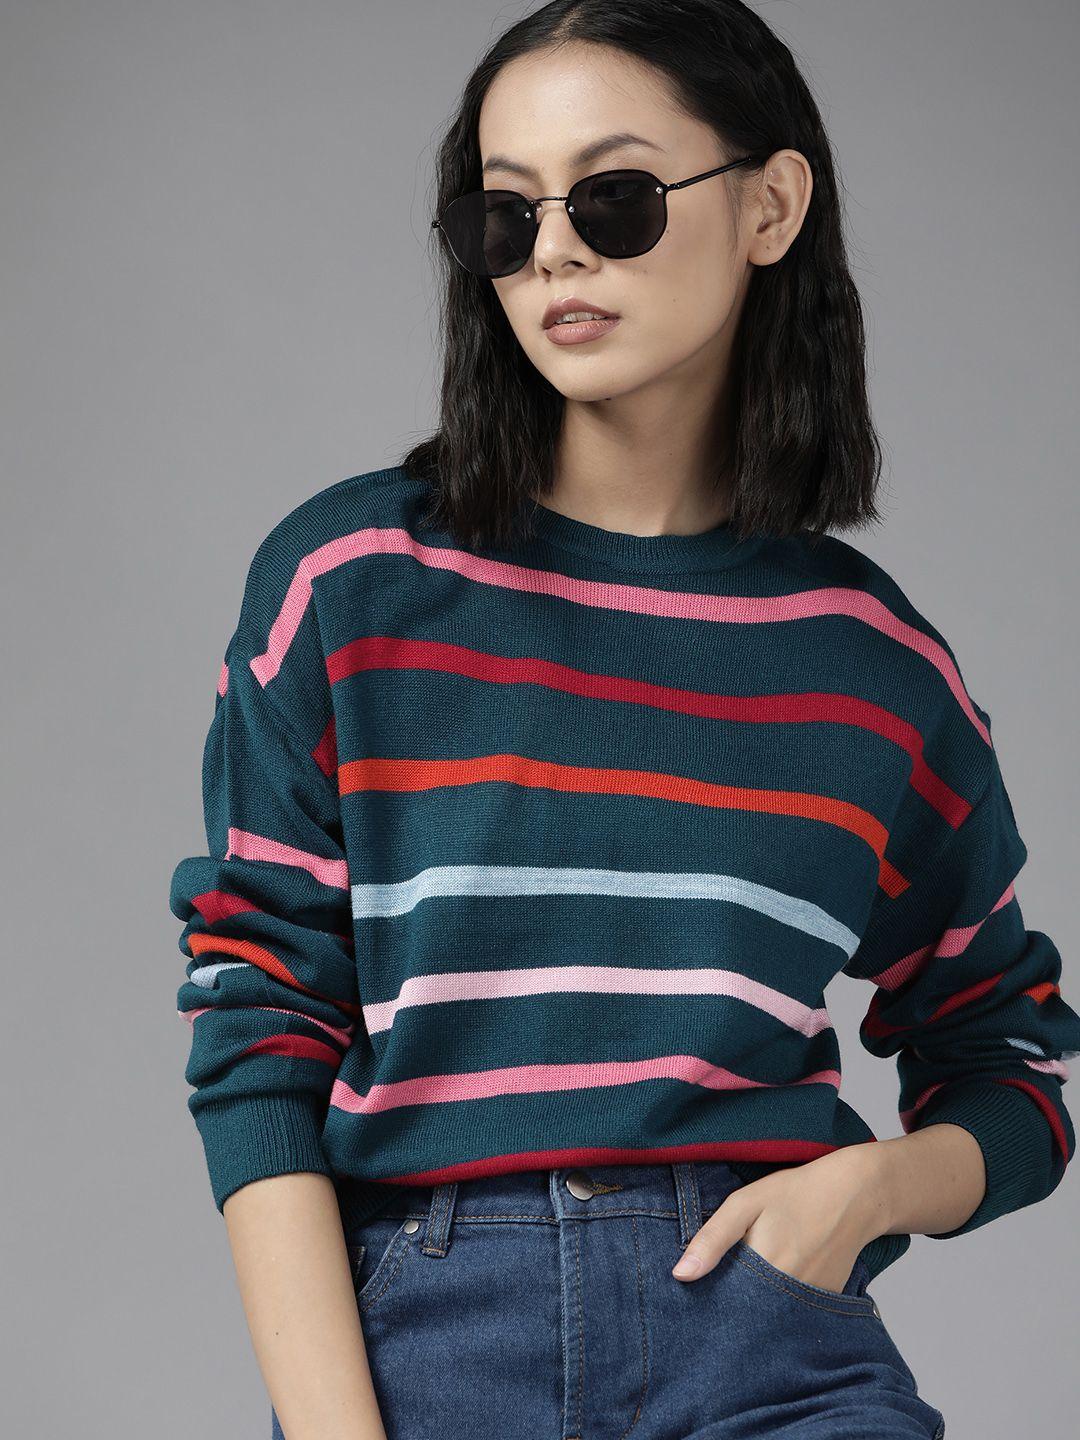 the roadster lifestyle co. women blue & pink striped pullover